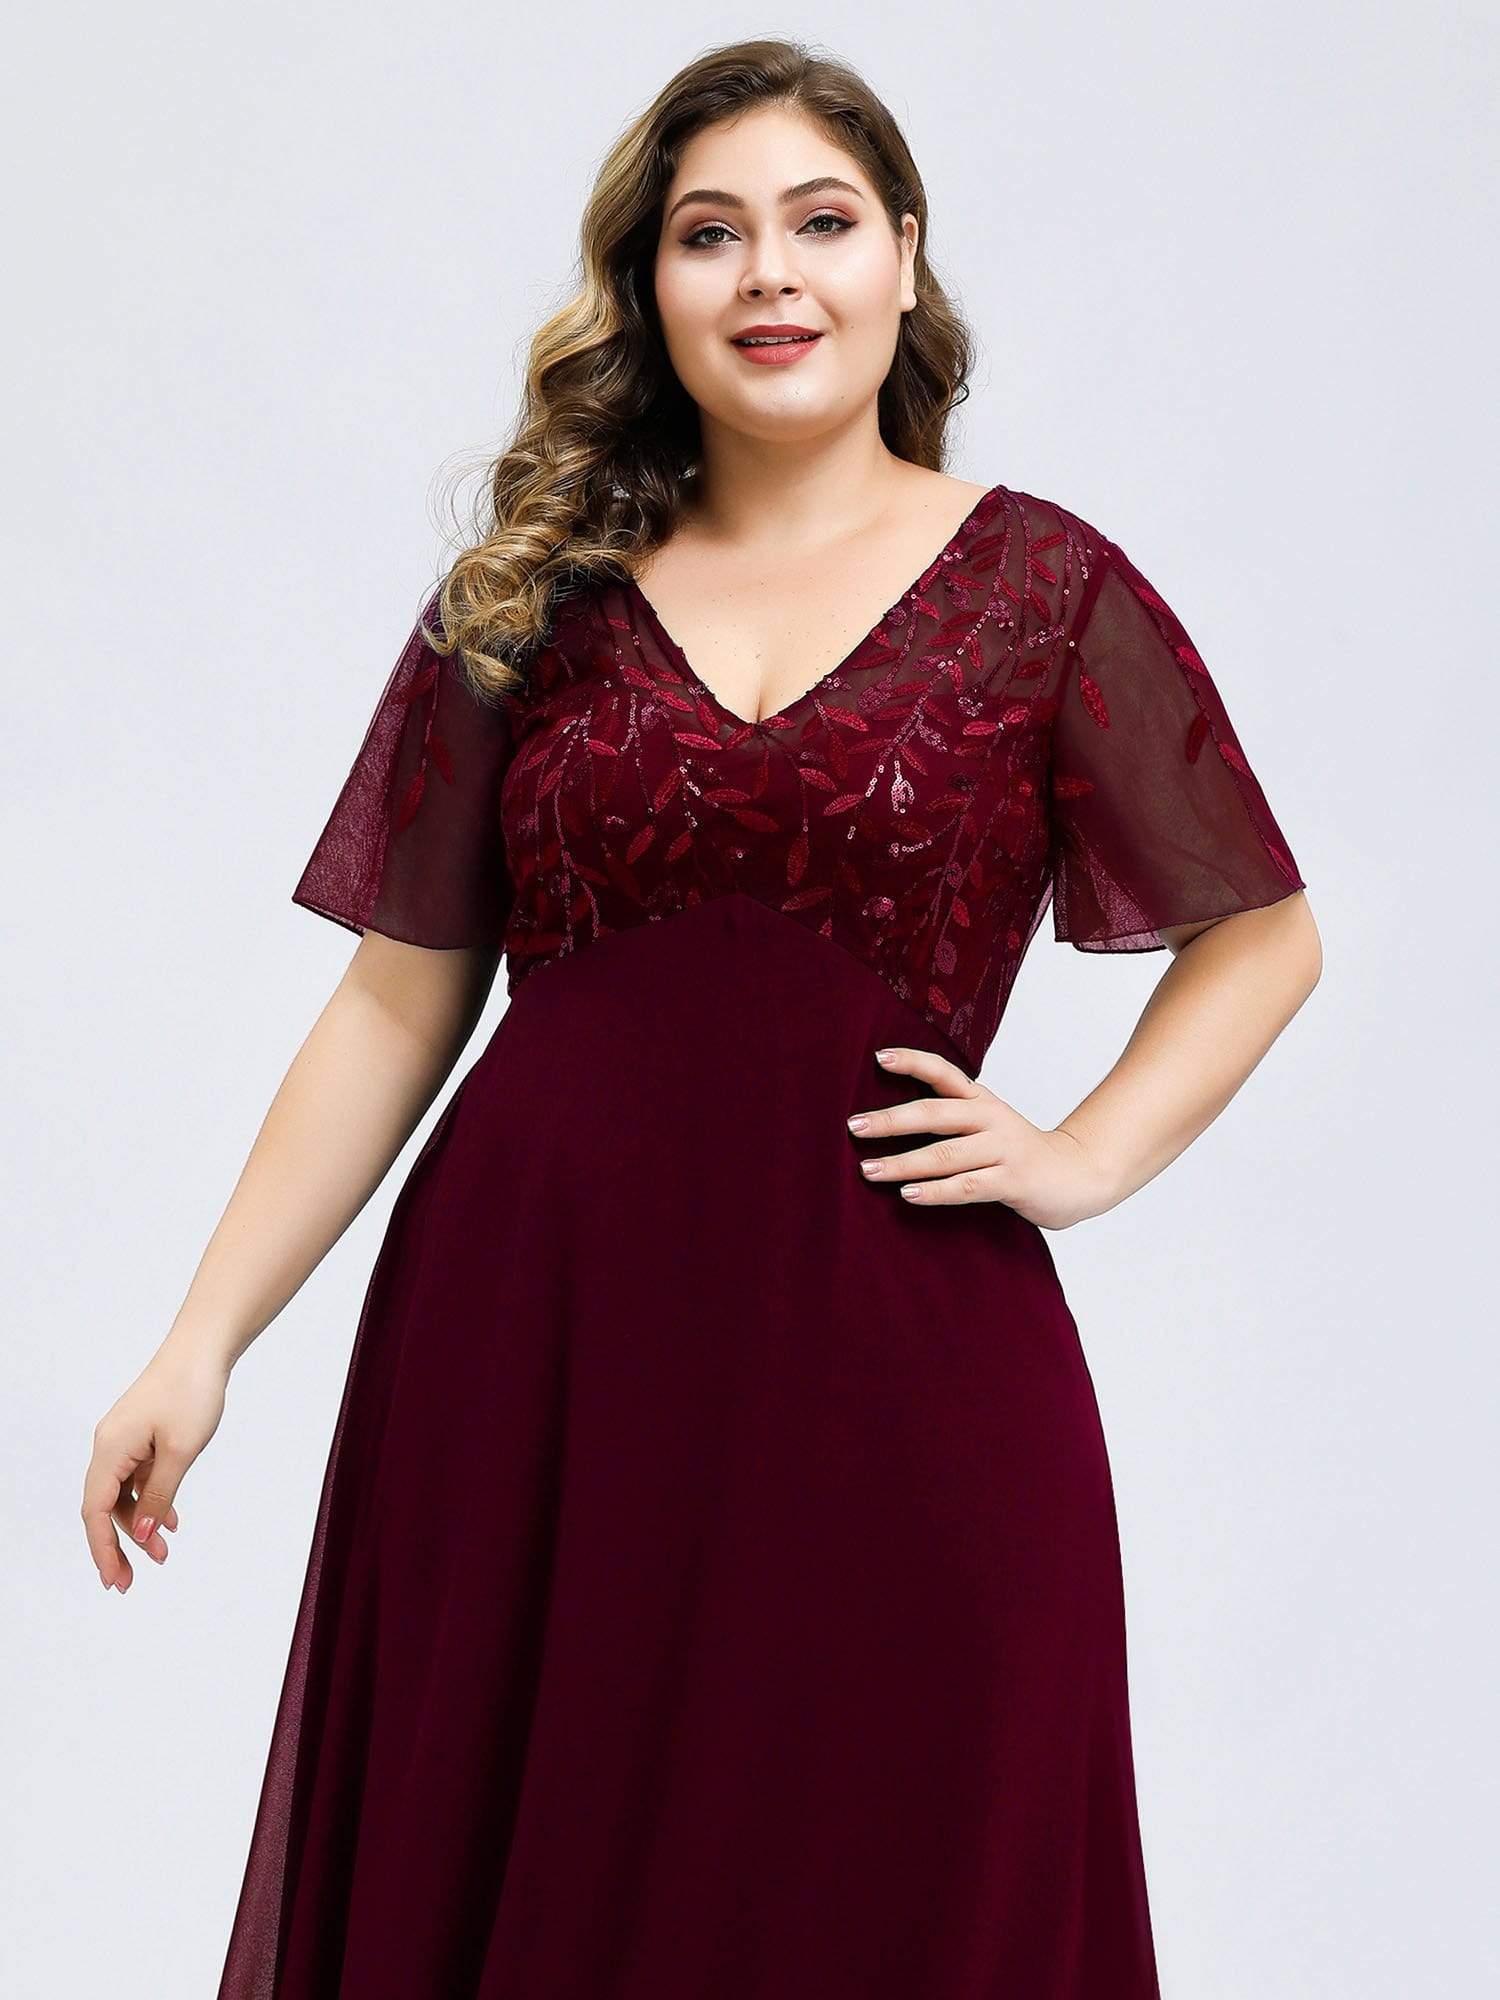 Plus Size Floral Sequin Print Evening Party Dresses with Cap Sleeve